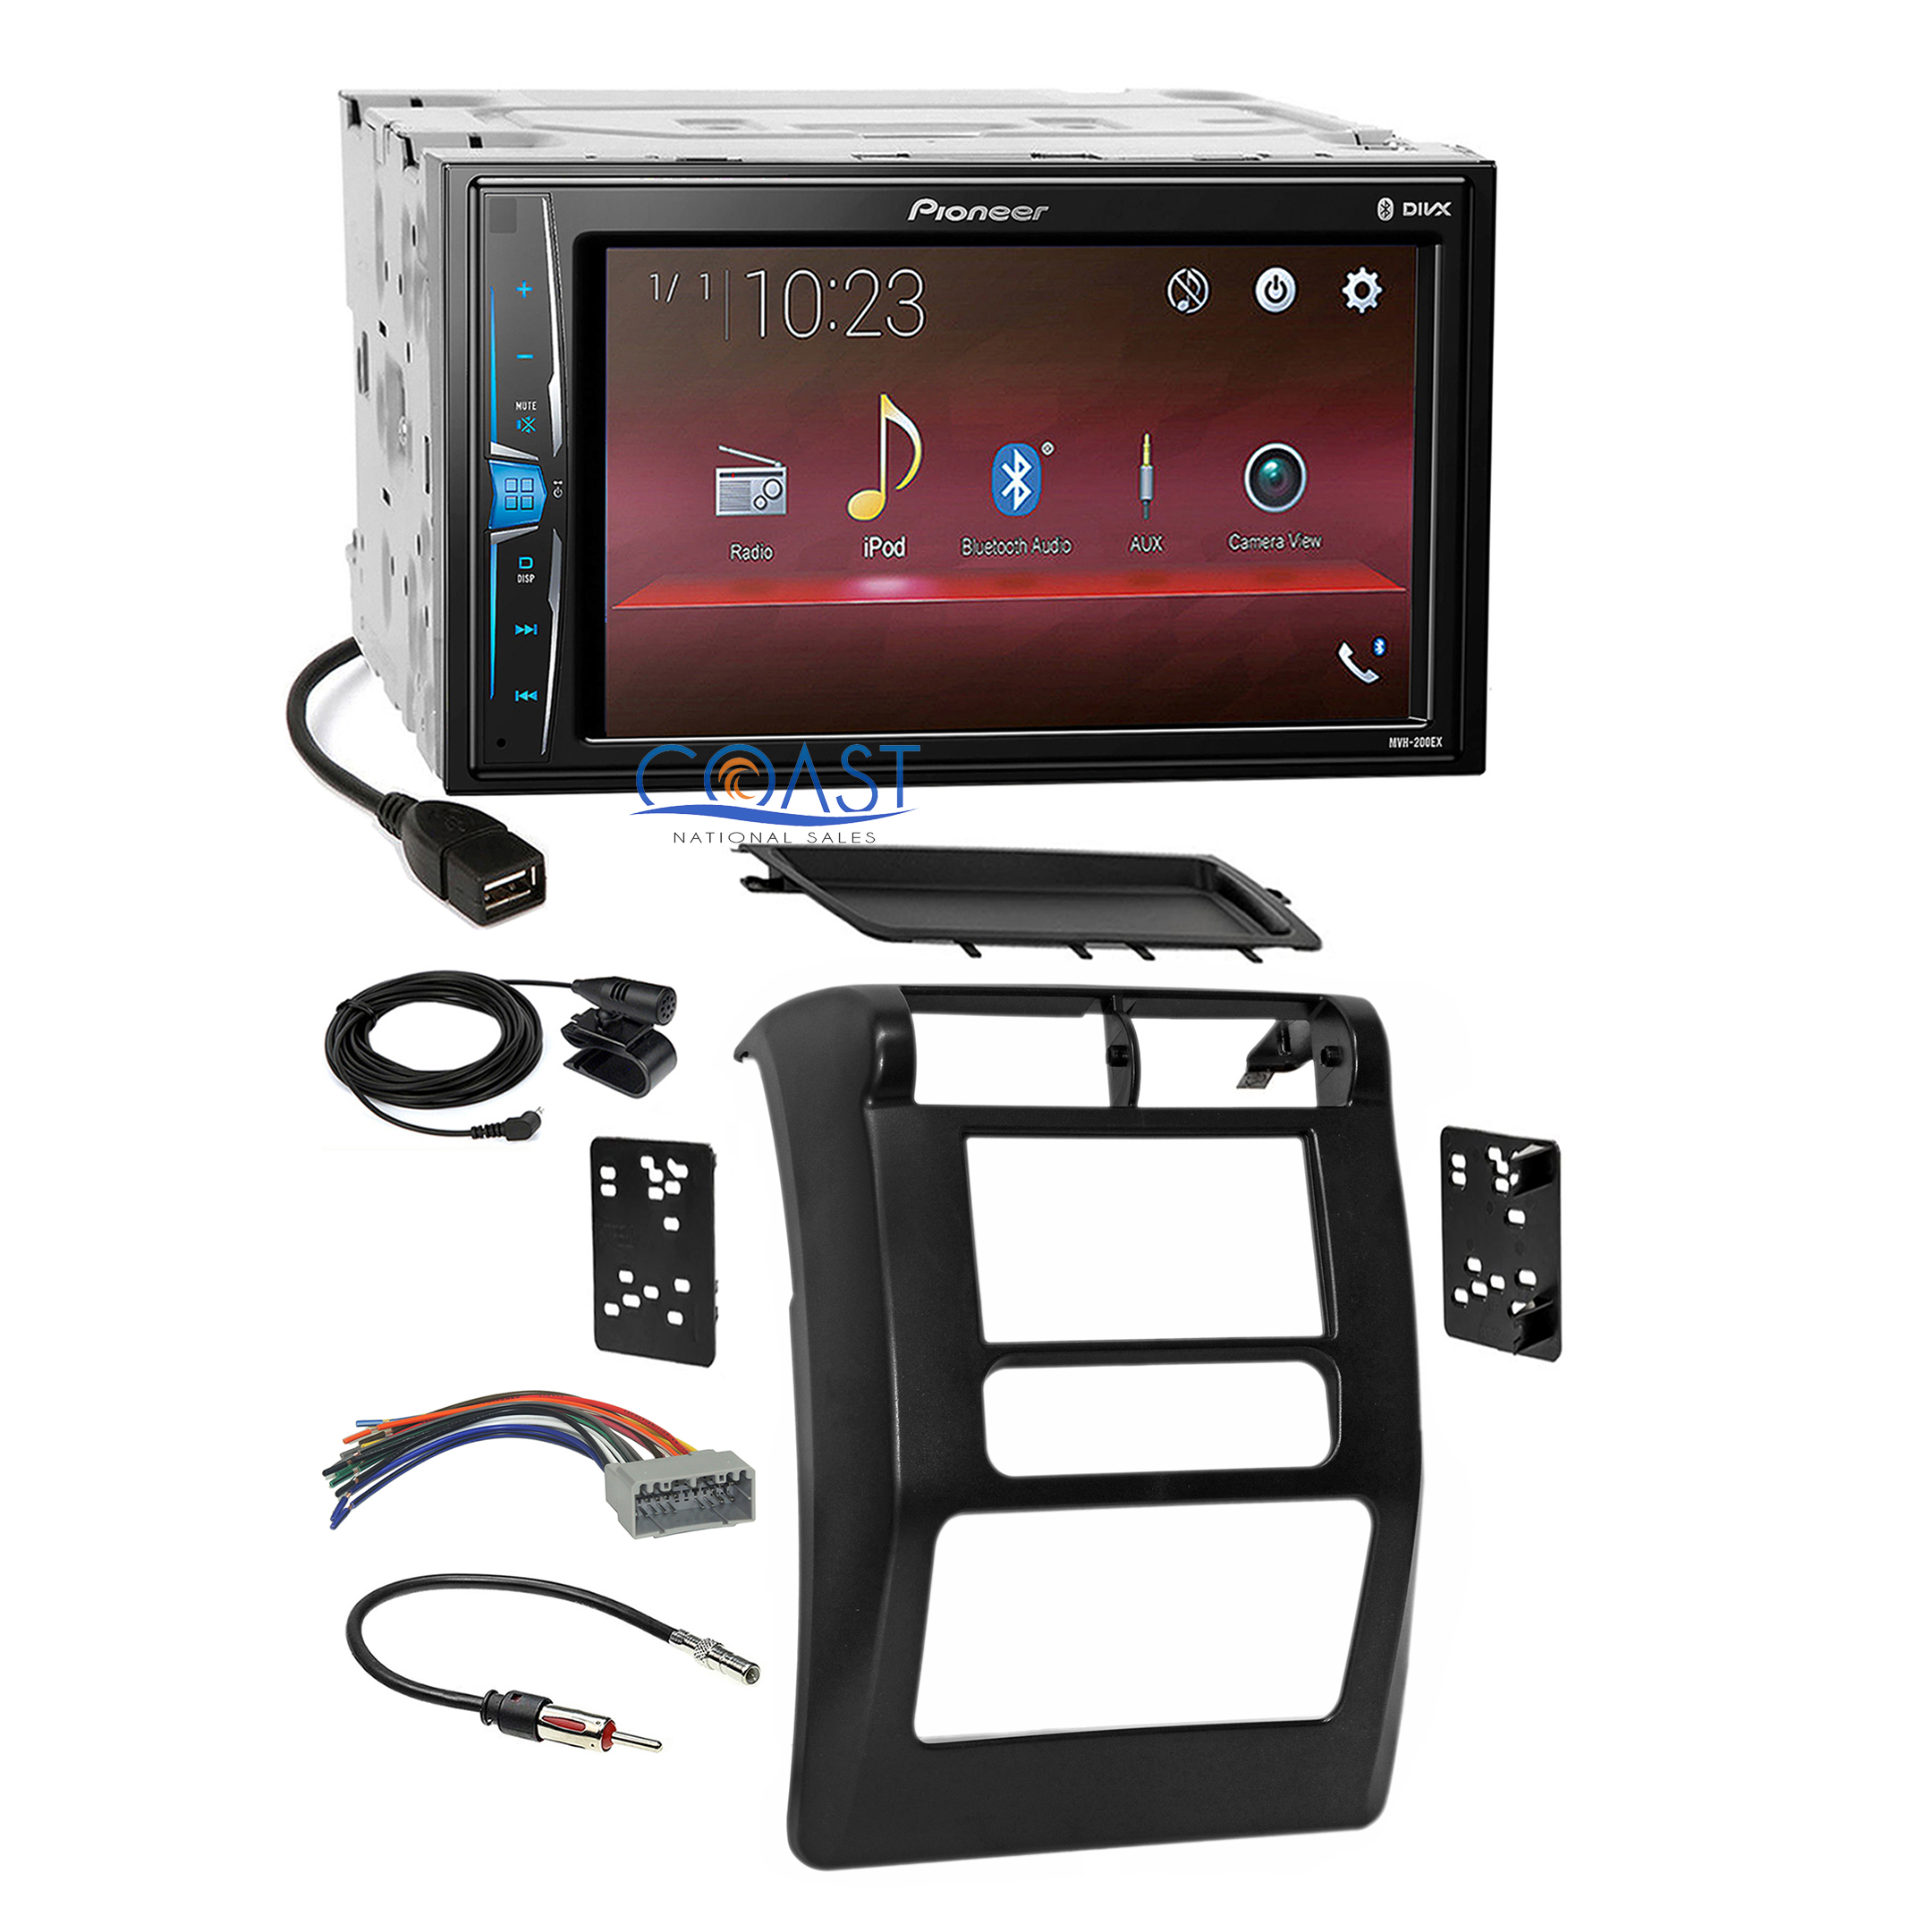 Car Stereo Mount 95-6541 Double Din Radio Install Dash Kit & Wires for Wrangler